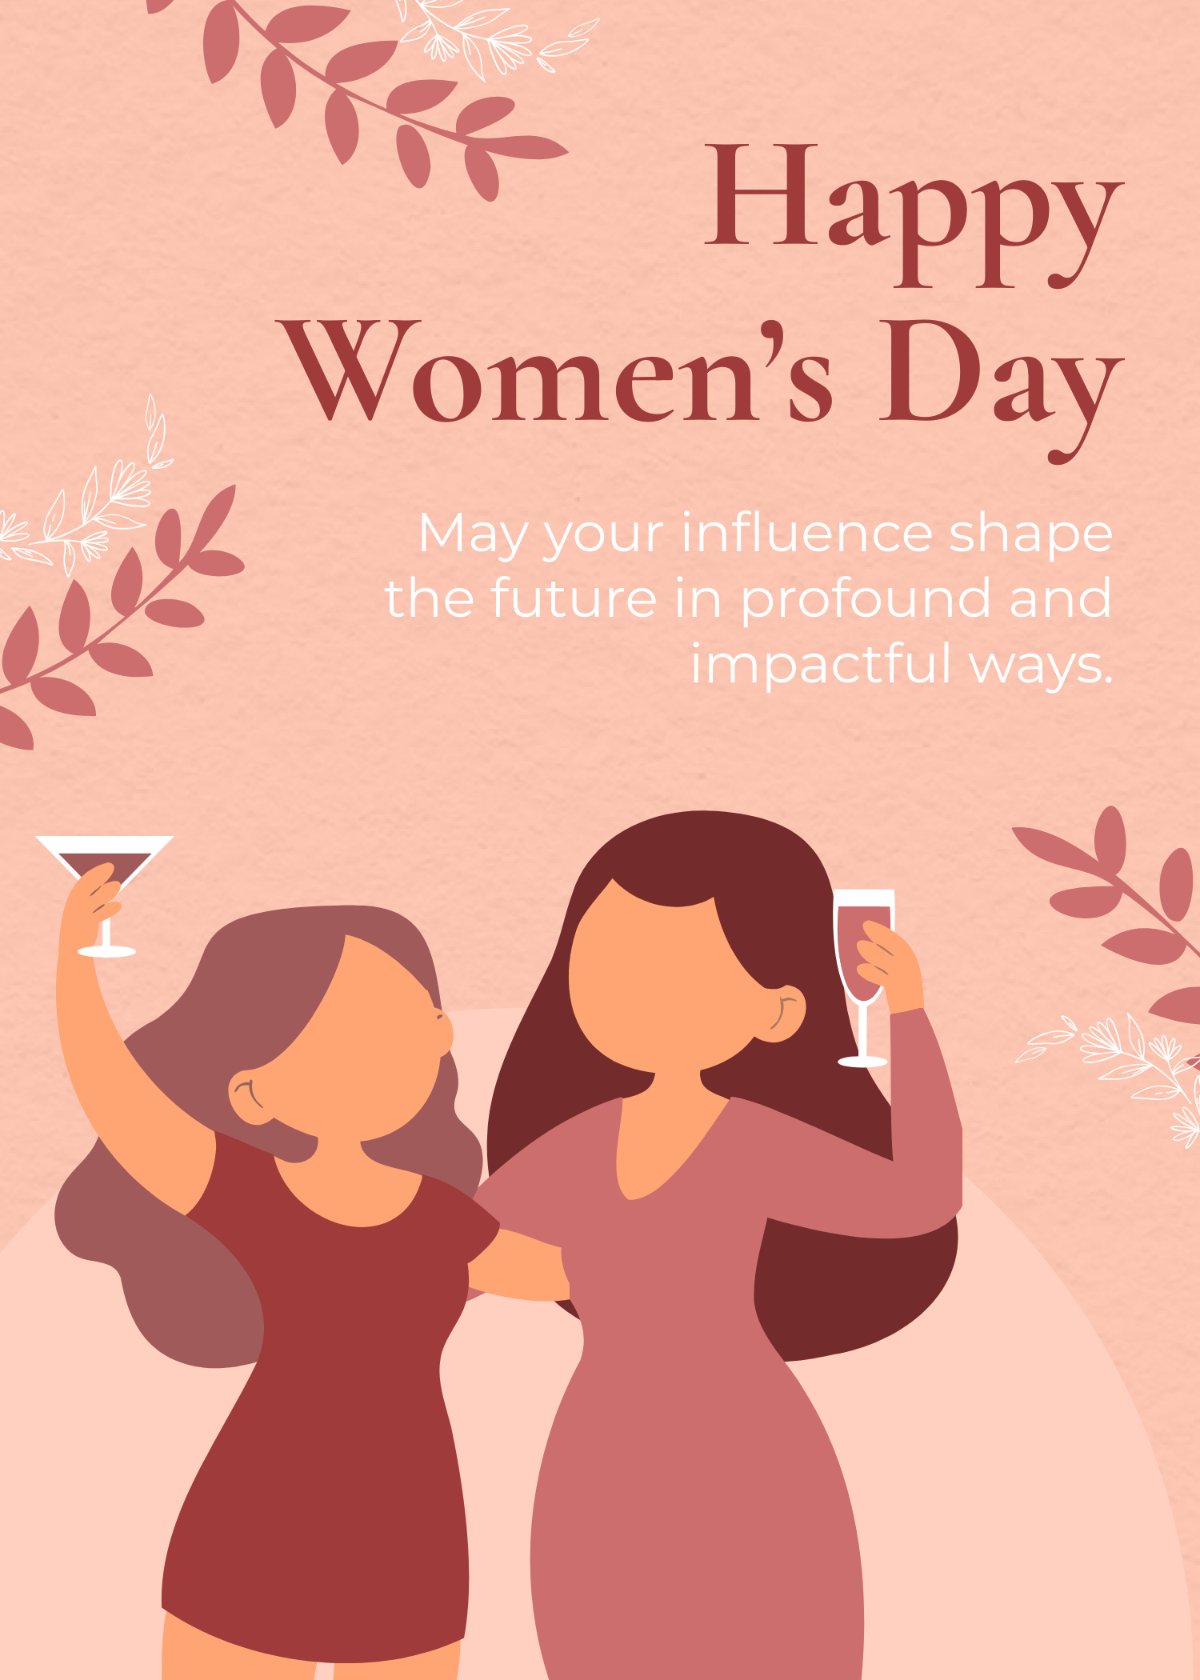 Women's Day Wishes Template